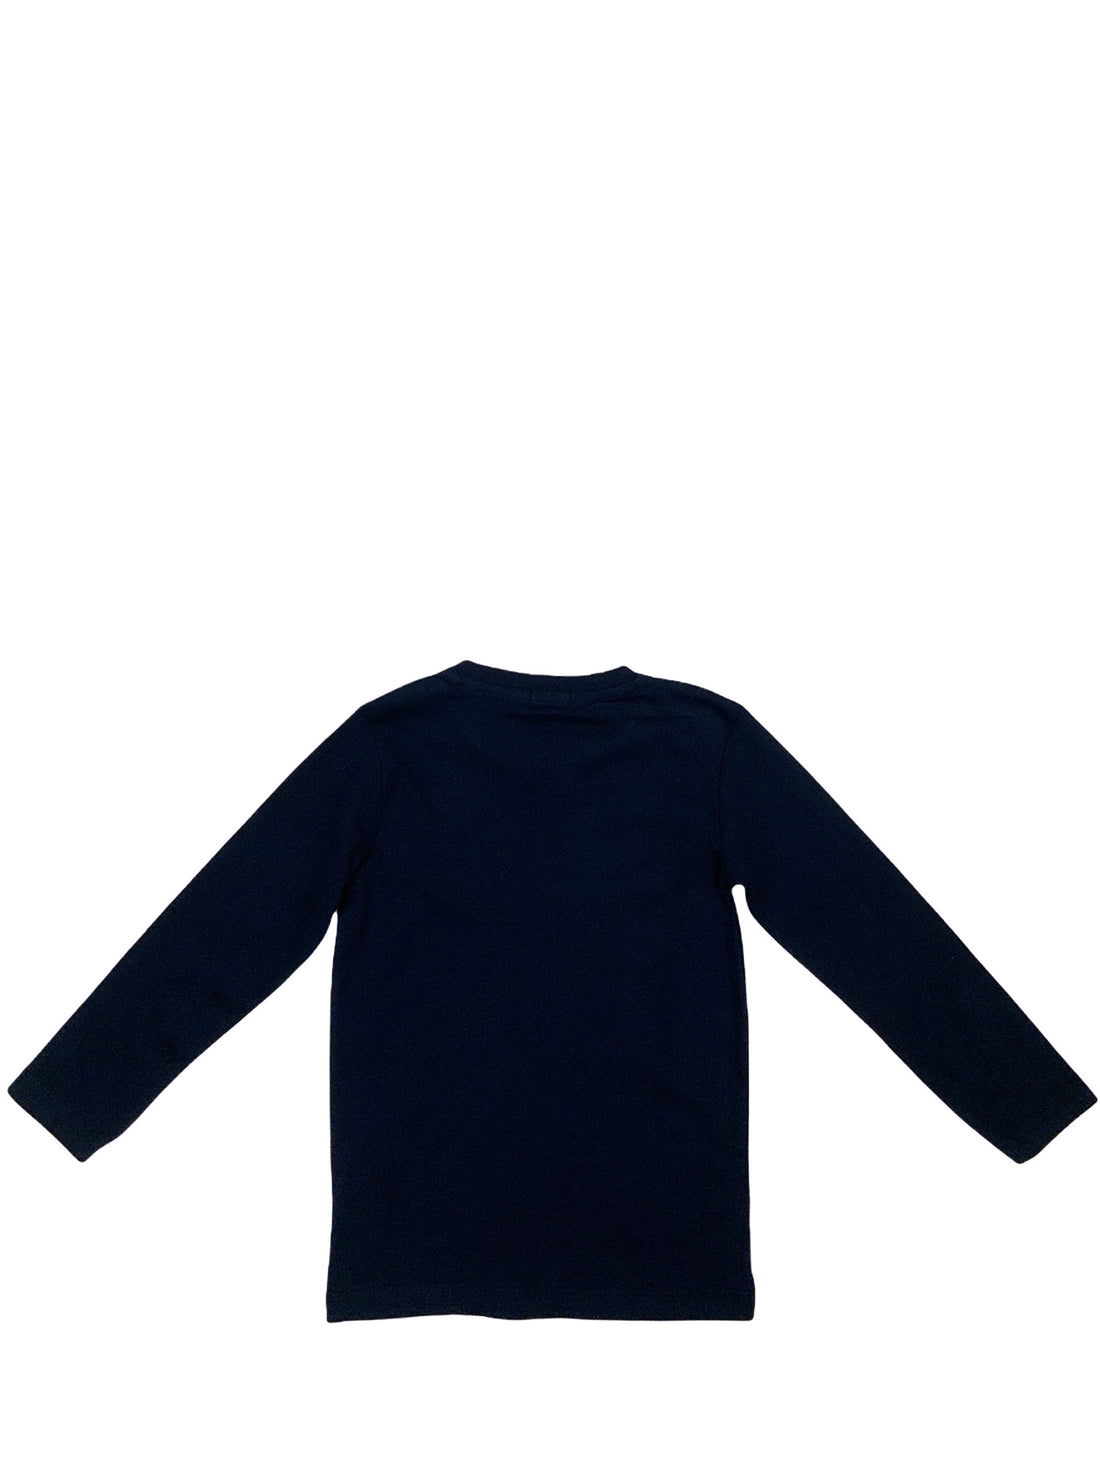 Maglie Blu Scuro Melby